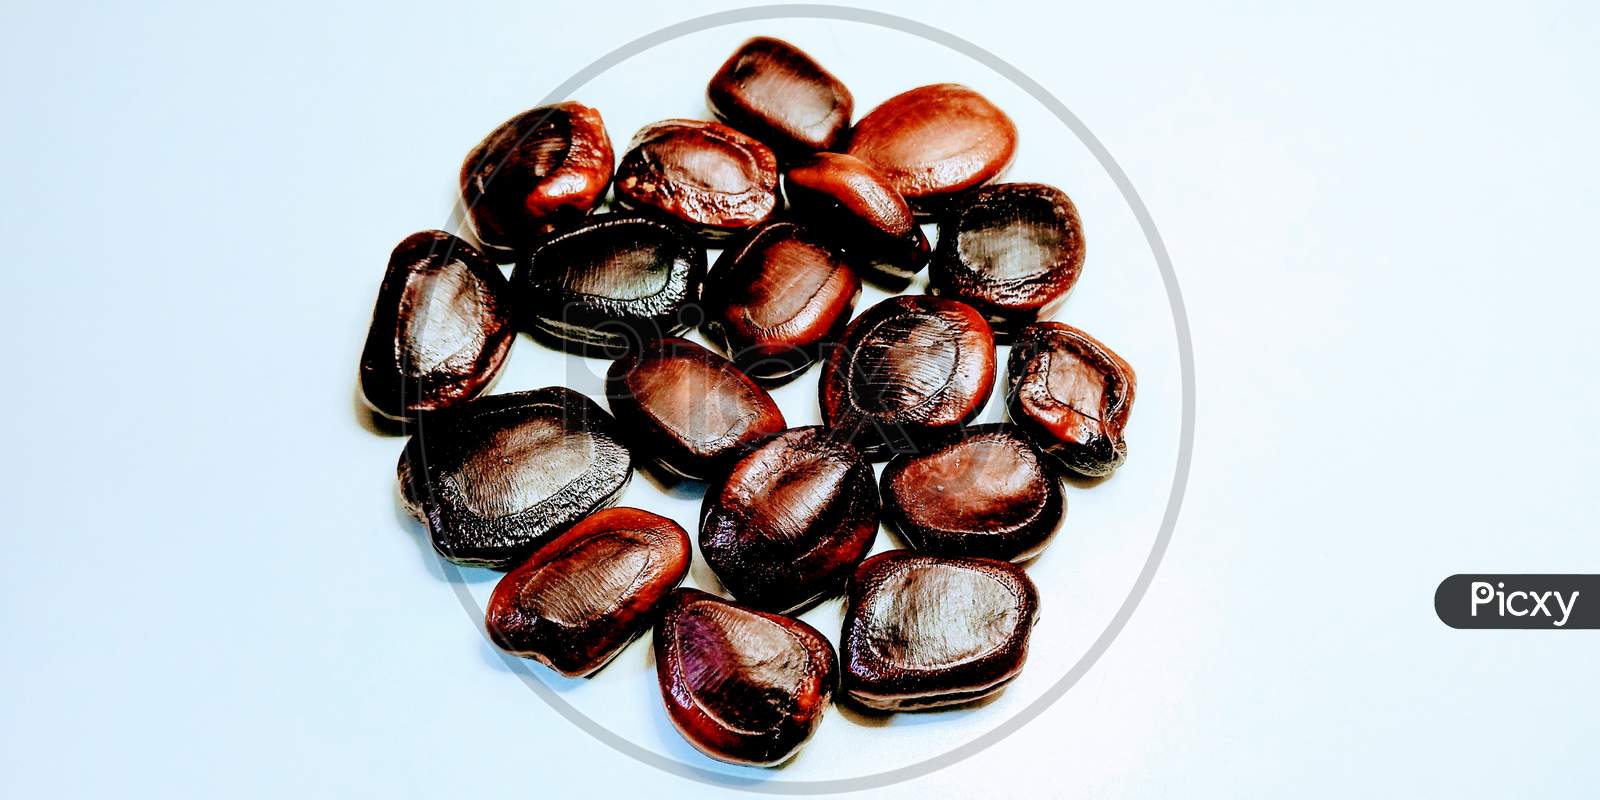 A picture of tamarind seeds